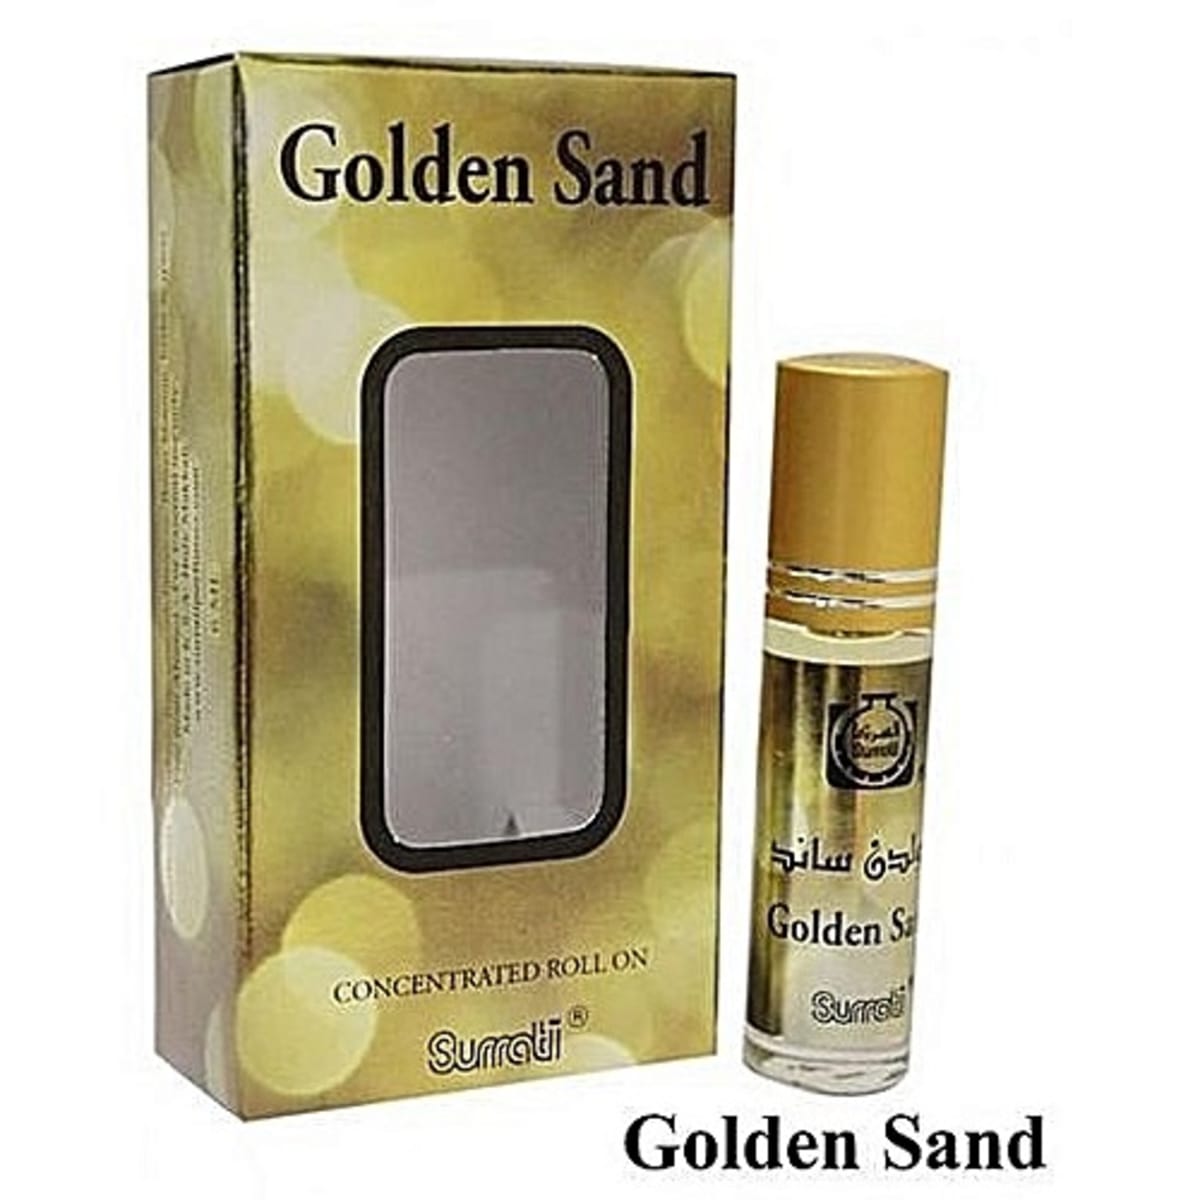 Surrati Undiluted Concentrated Oil Perfume- Golden Sand 6ml